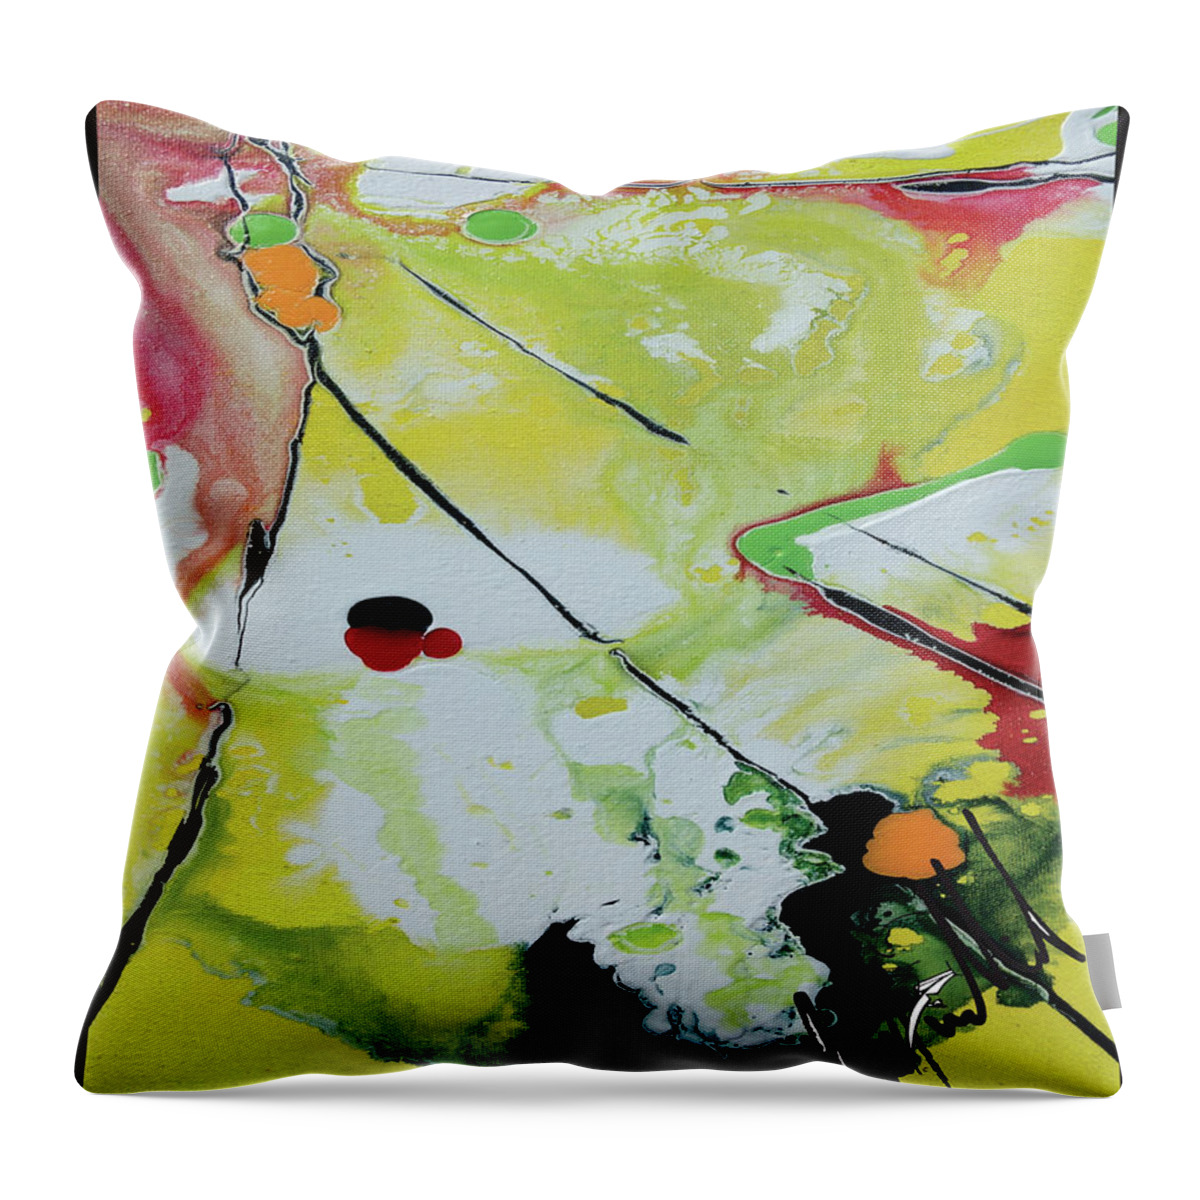  Throw Pillow featuring the painting Meta6 by Jimmy Williams